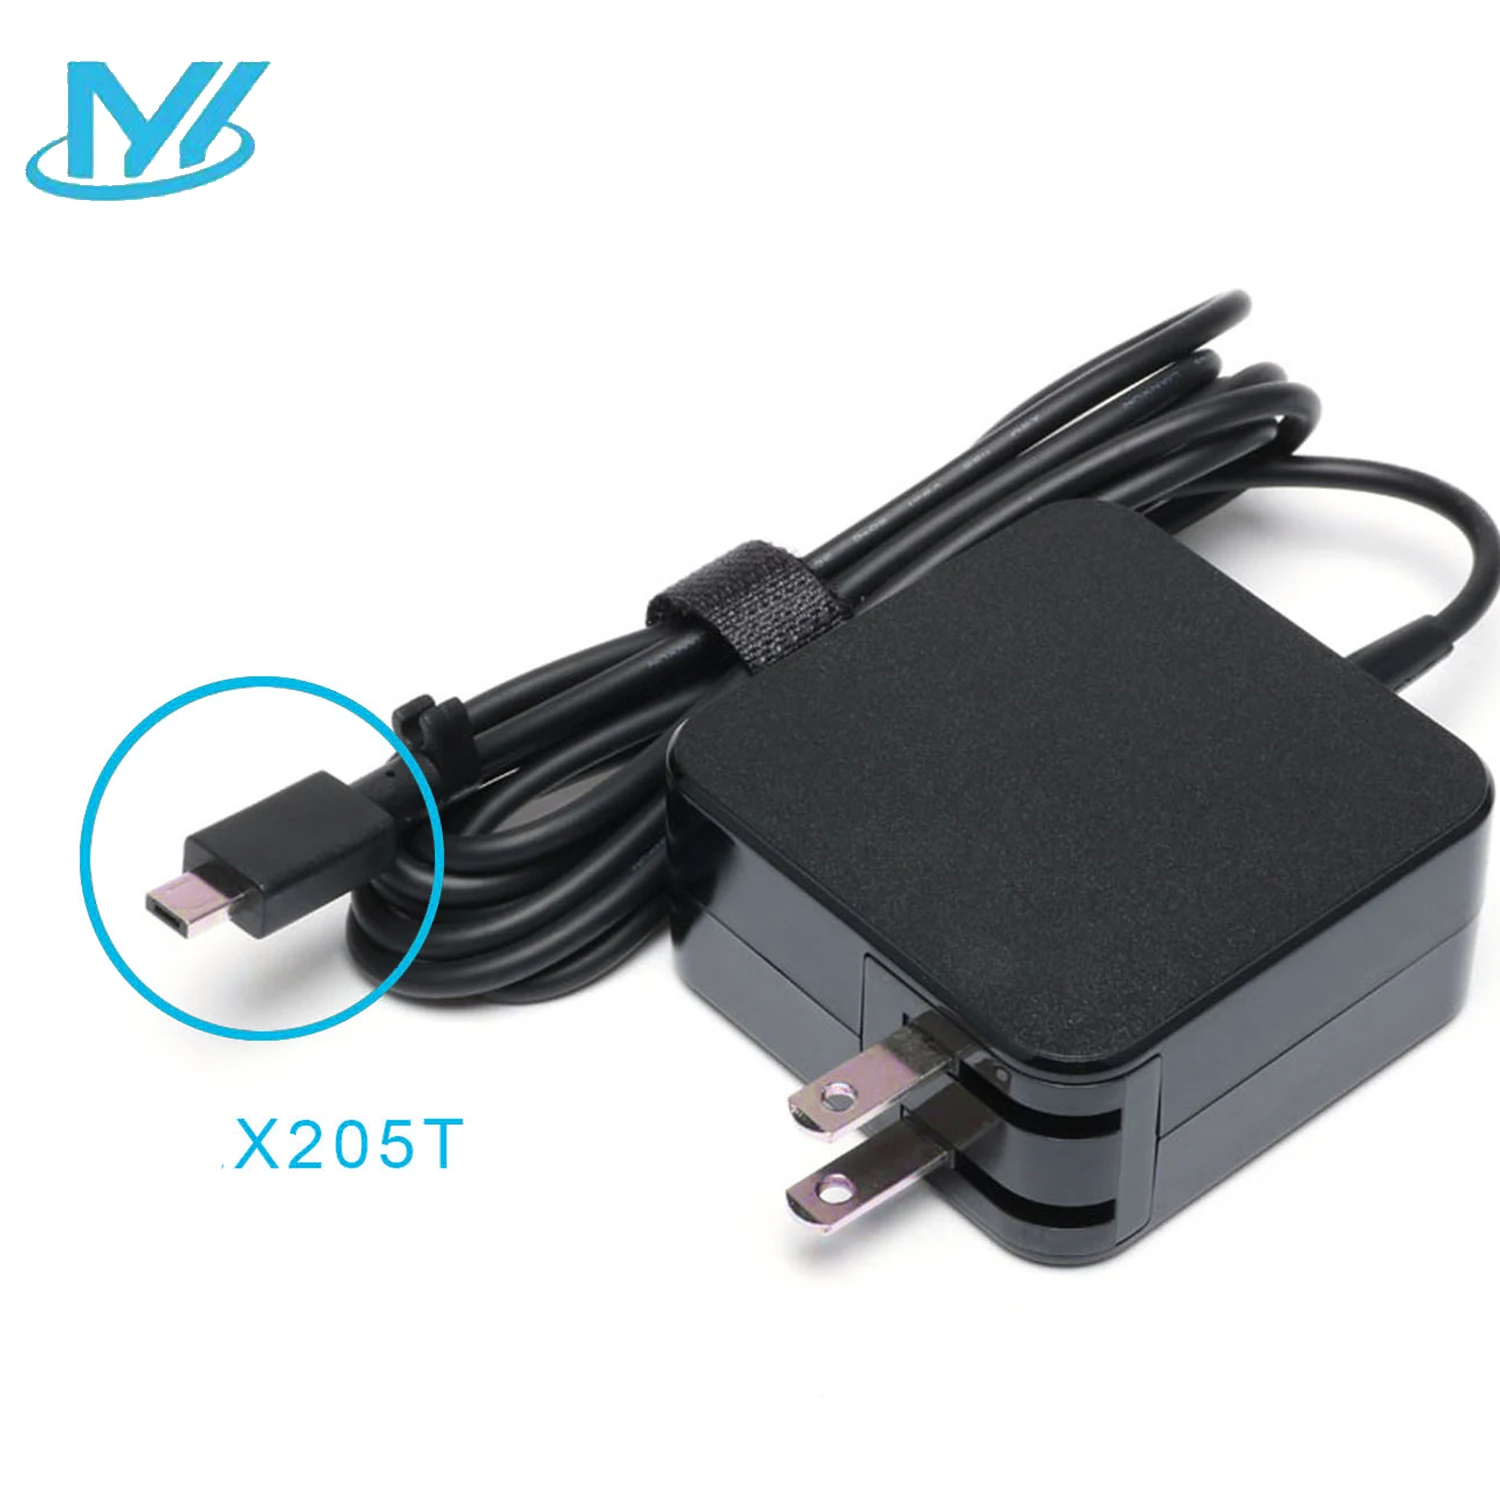 100% Oem 19v 1.75a Ac Laptop Power Adapter Charger For Asus Eeebook X205ta T100ha Tp200 Tp200s Adp-33aw - Buy 19v 1.75a Asus Eu Plug X205t X205ta 11.6inch Laptop